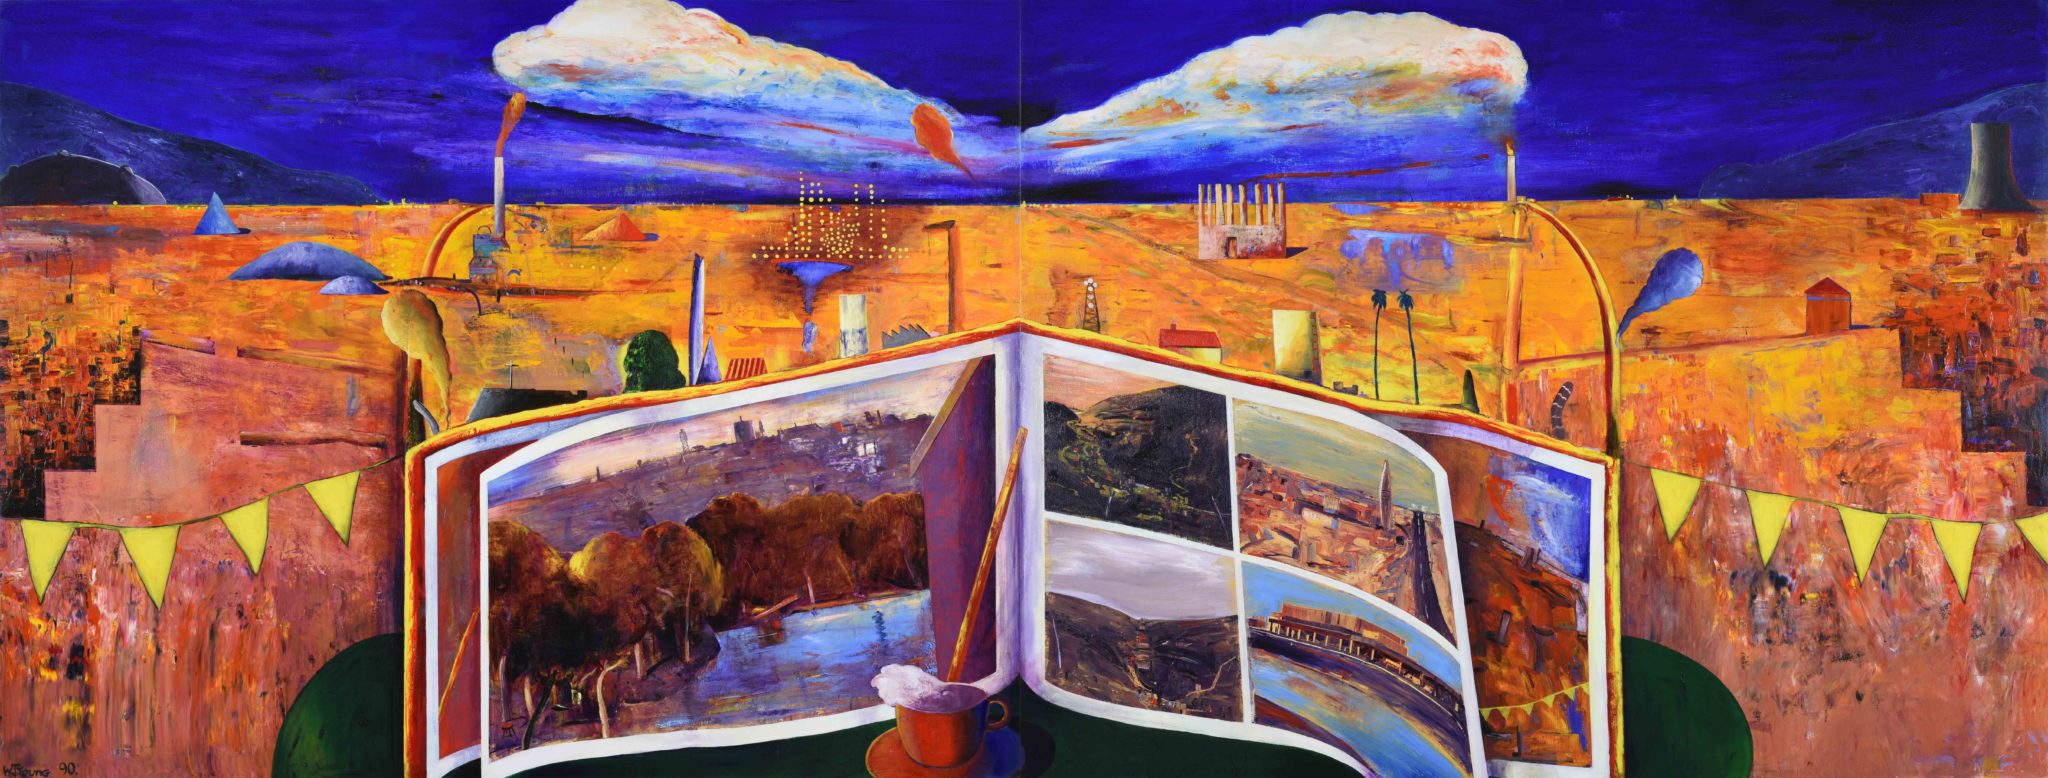 Bill Young, Spirit of Morwell, 1990, Acrylic on MDF, Two panels 183 x 240 cm each, Latrobe Regional Gallery Collection, commissioned by the City of Morwell, 1990.